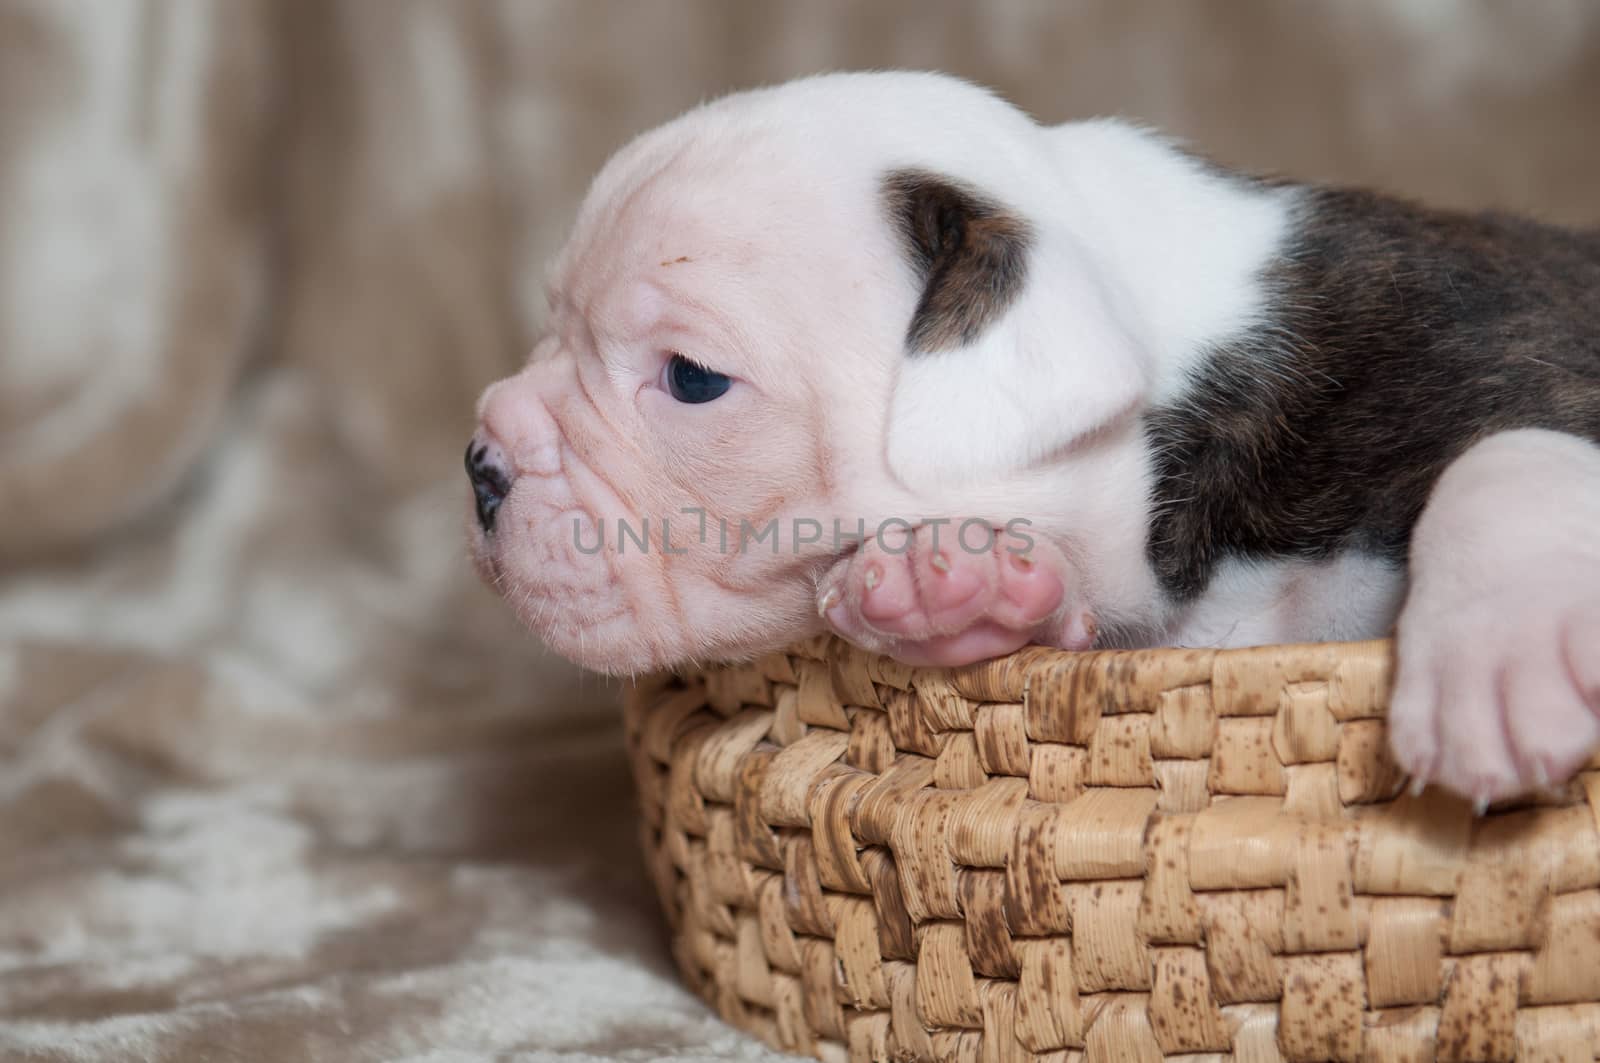 Small American Bulldog puppy on light background by infinityyy